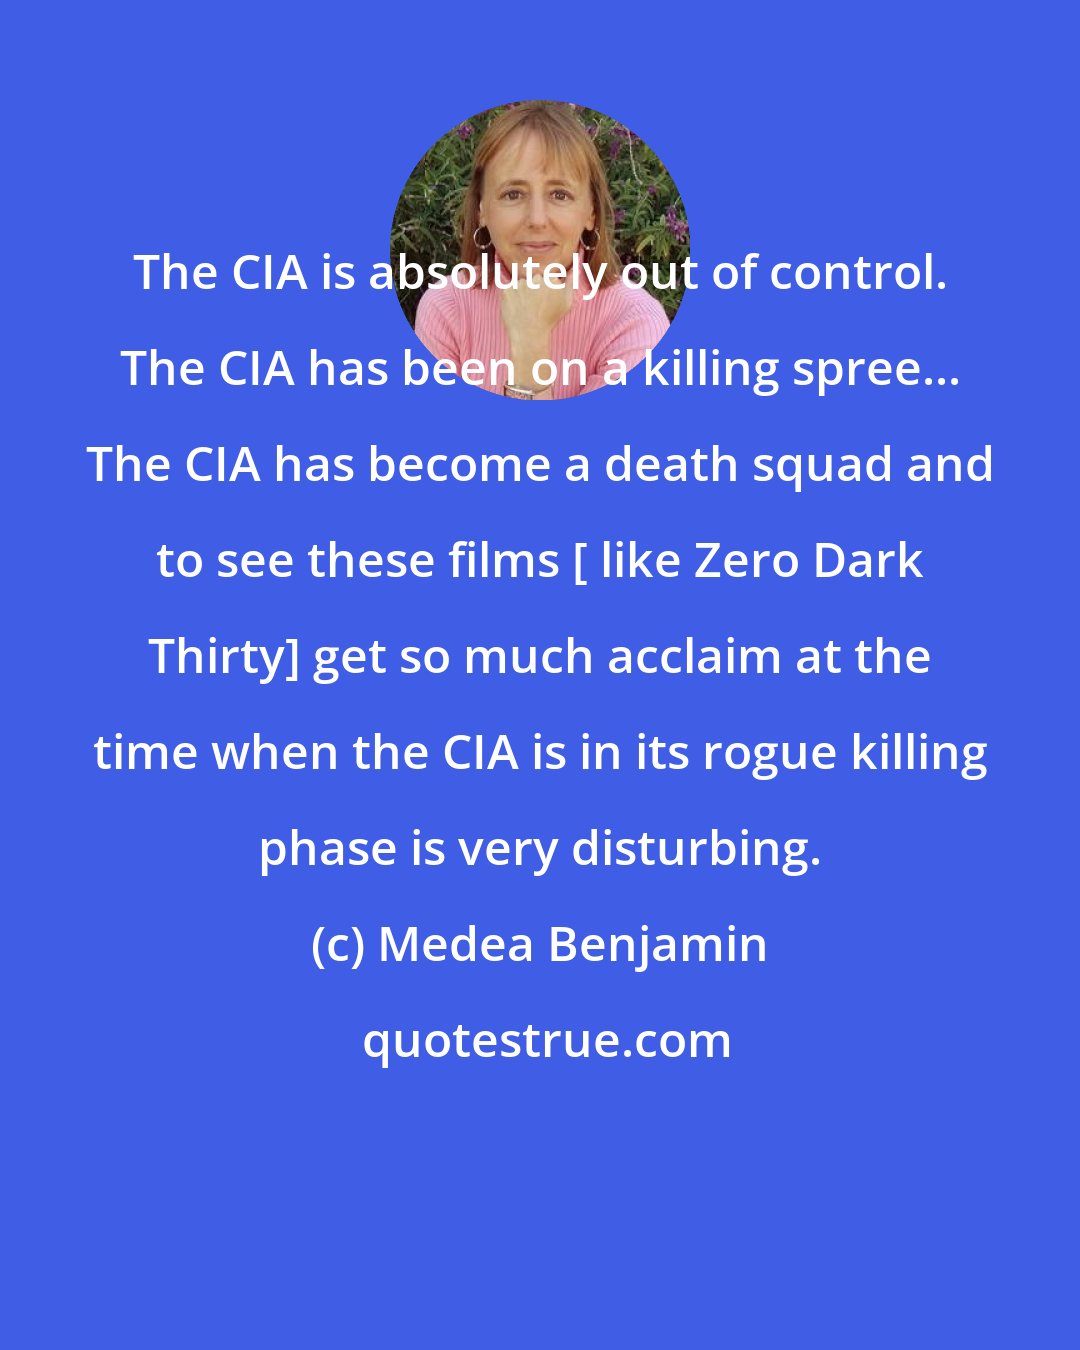 Medea Benjamin: The CIA is absolutely out of control. The CIA has been on a killing spree... The CIA has become a death squad and to see these films [ like Zero Dark Thirty] get so much acclaim at the time when the CIA is in its rogue killing phase is very disturbing.